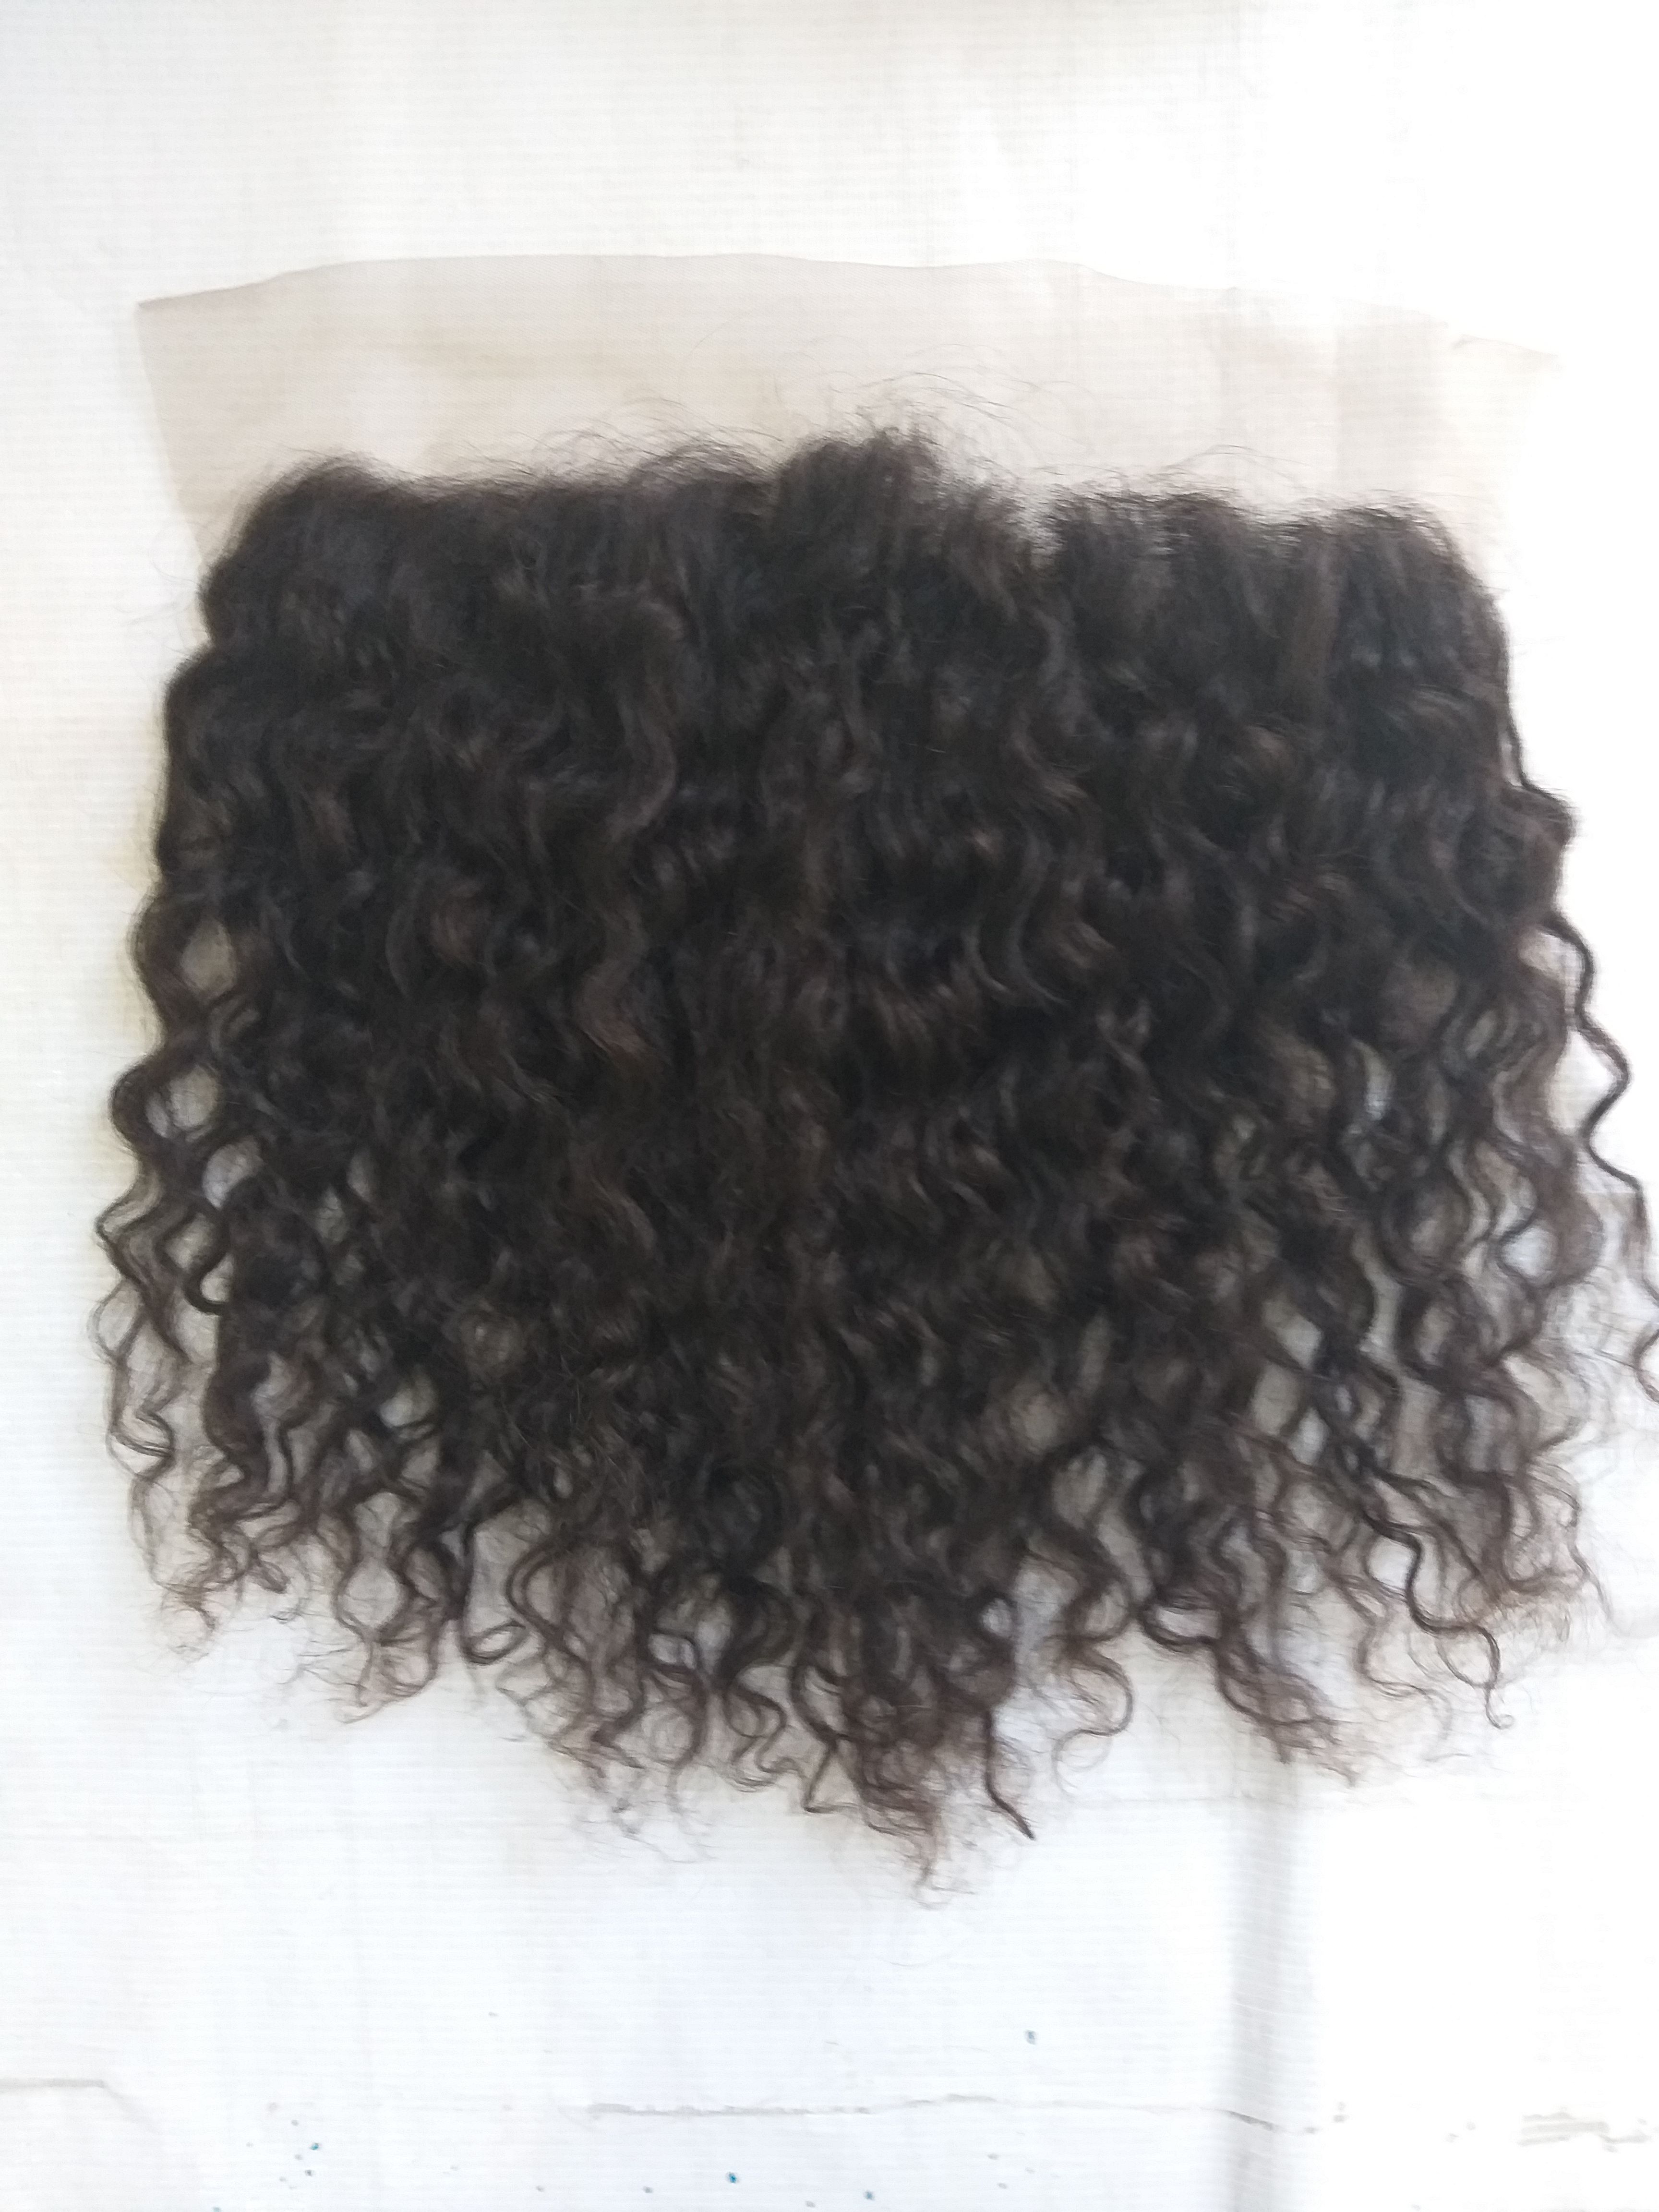 Raw Curly Lace Frontal Closure